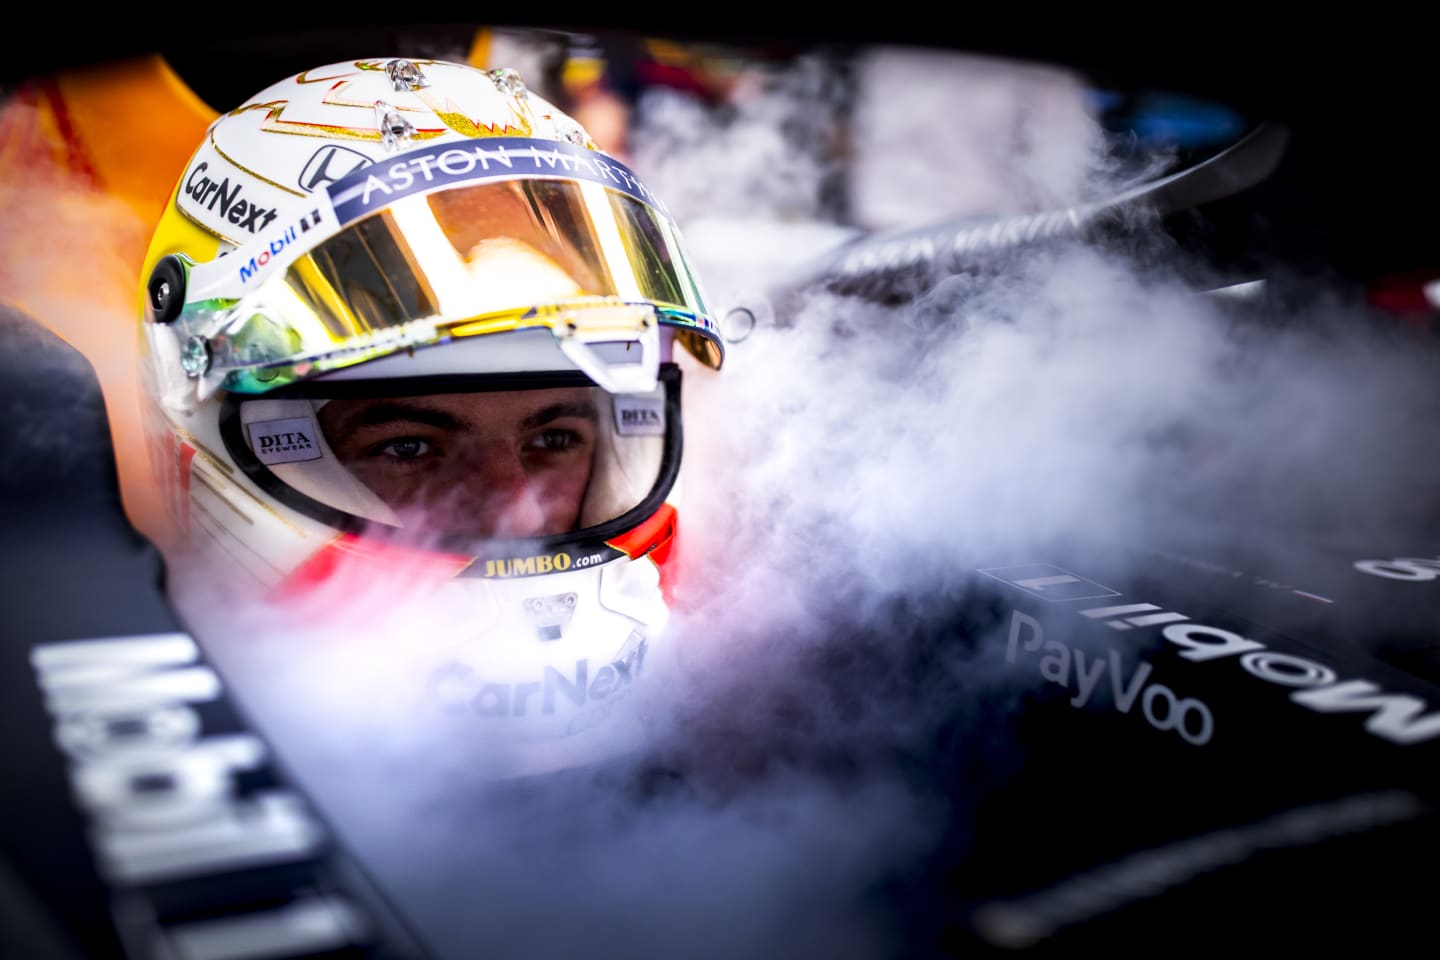 BARCELONA, SPAIN - AUGUST 14: Max Verstappen of Netherlands and Red Bull Racing prepares to drive in the garage during practice for the F1 Grand Prix of Spain at Circuit de Barcelona-Catalunya on August 14, 2020 in Barcelona, Spain. (Photo by Mark Thompson/Getty Images)